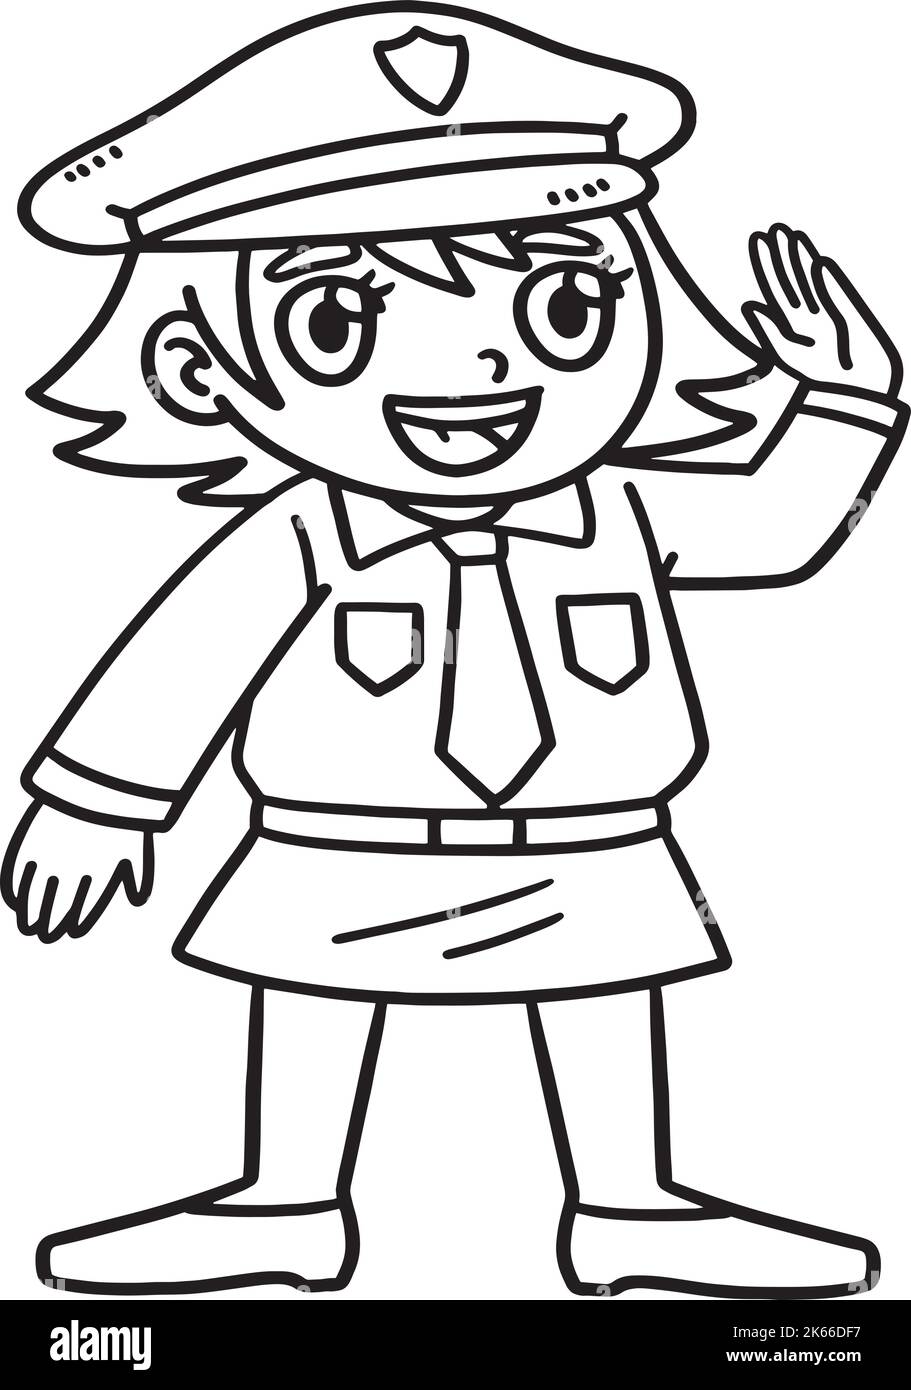 Policewoman Isolated Coloring Page for Kids Stock Vector